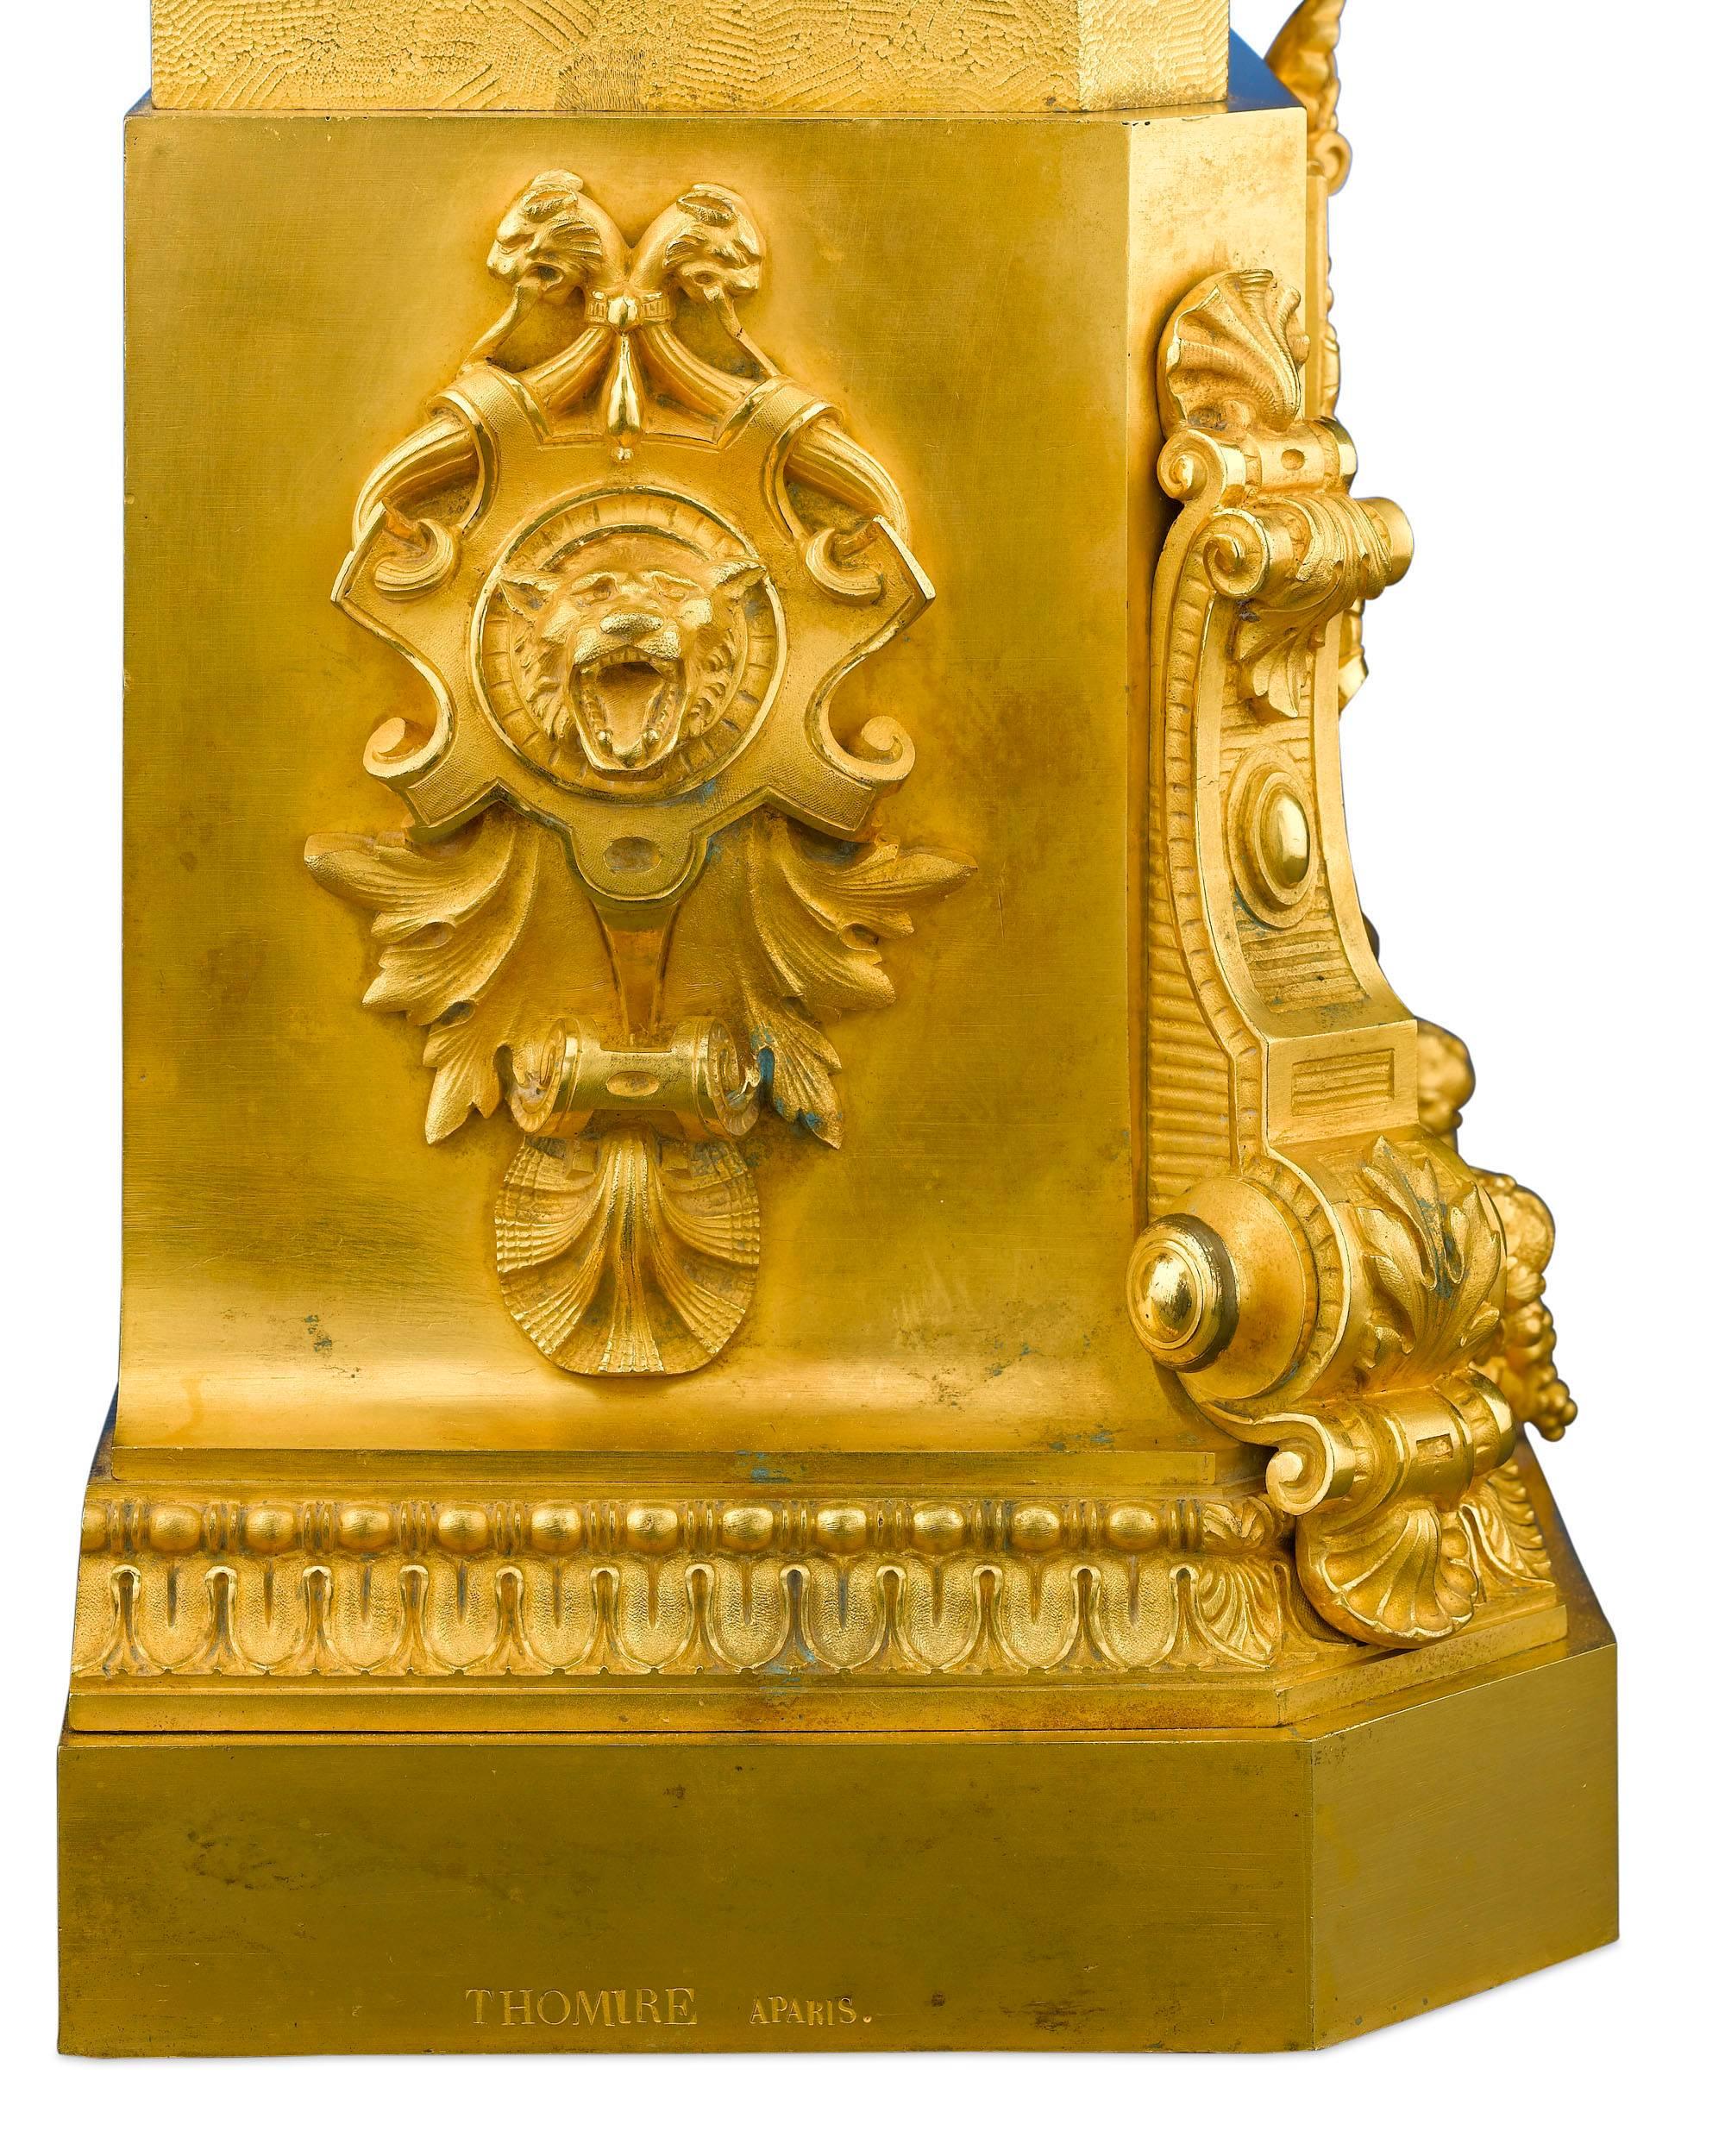 Gilt French Mantel Clock by Thomire & Moinet